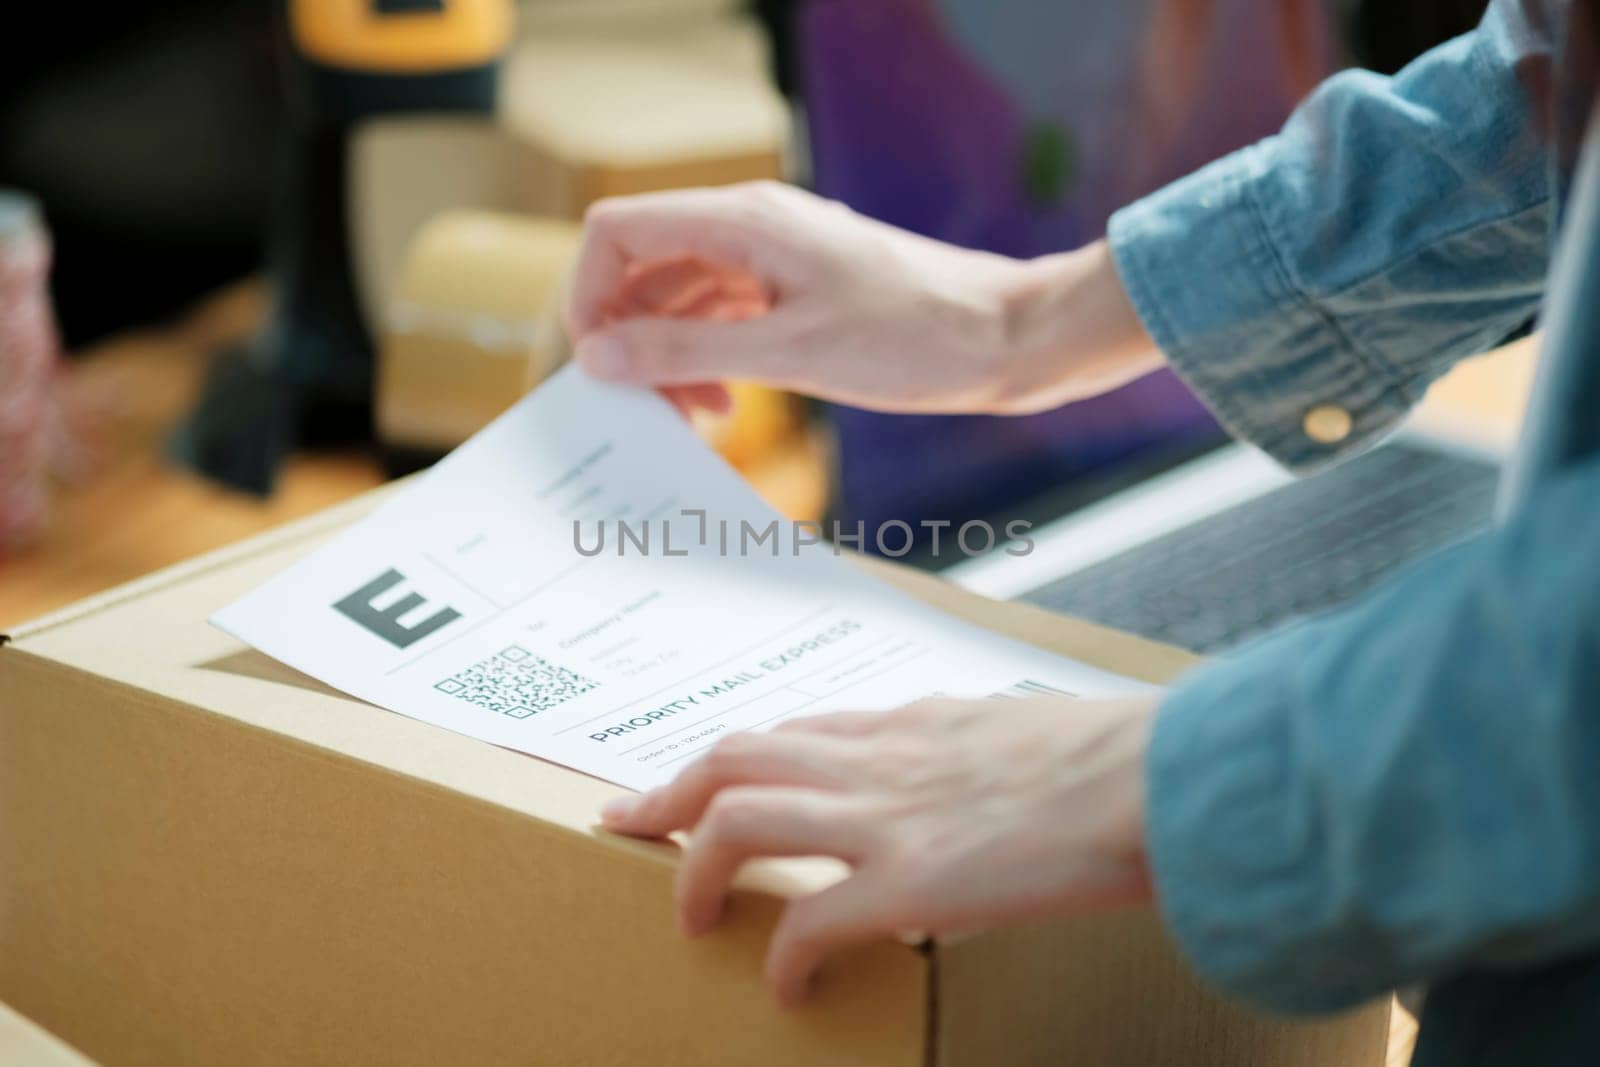 Attaching shipping label to a parcel. E-commerce business shipment preparation. Close-up of package labeling process.